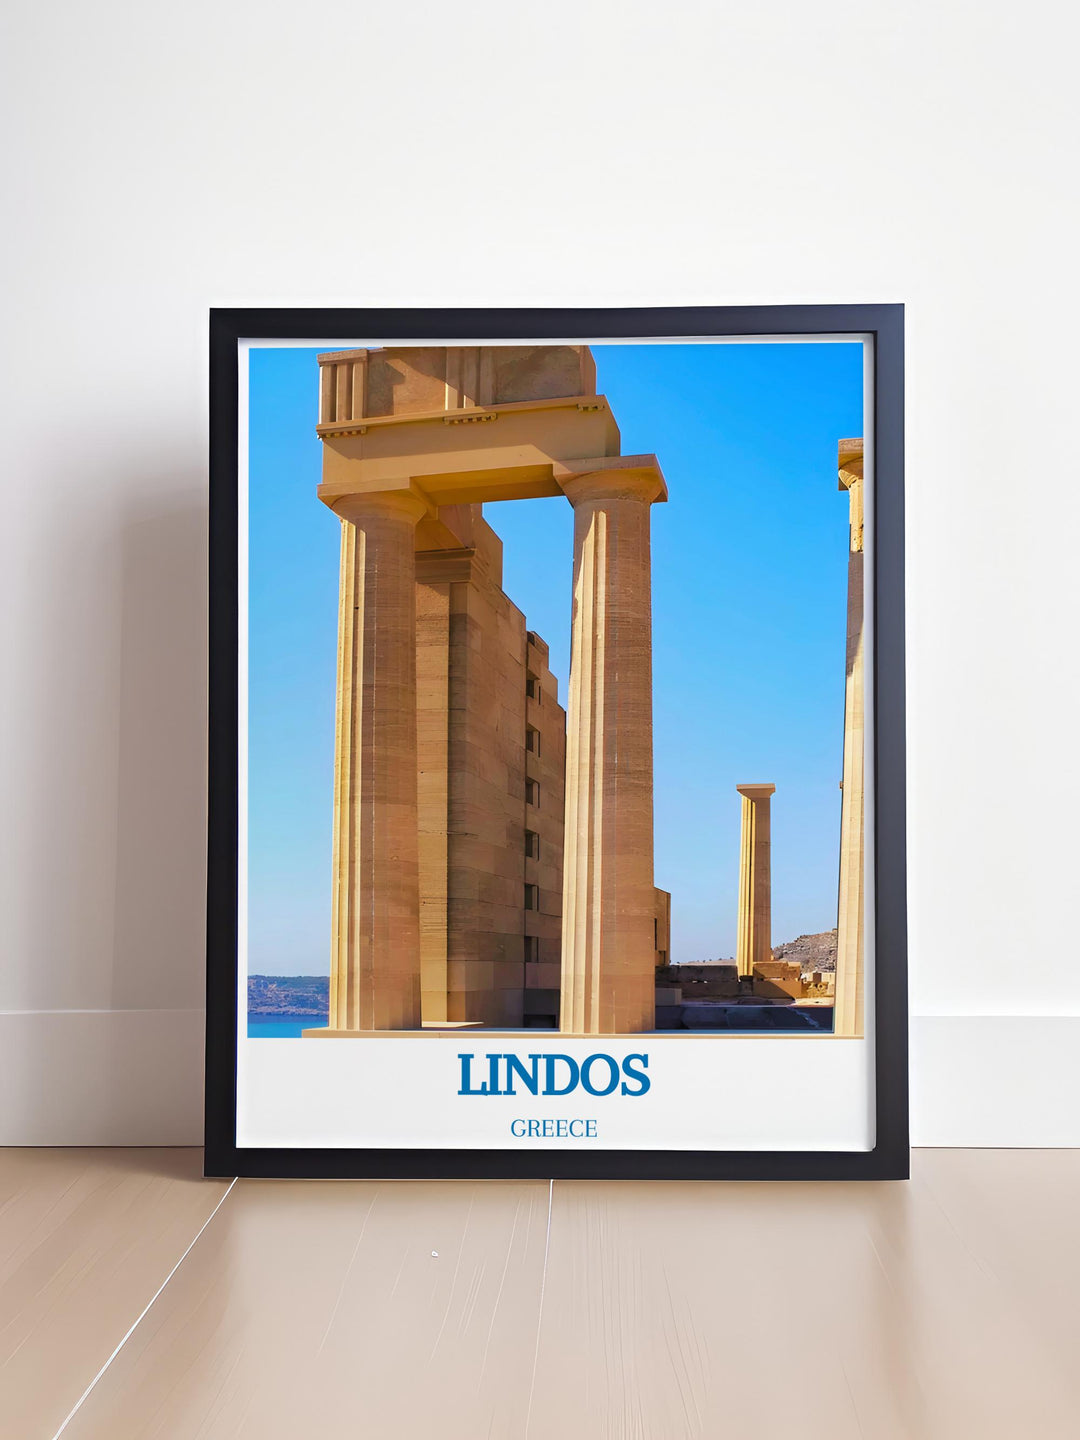 Home decor featuring the Acropolis of Lindos, ideal for adding a historical element to any room.